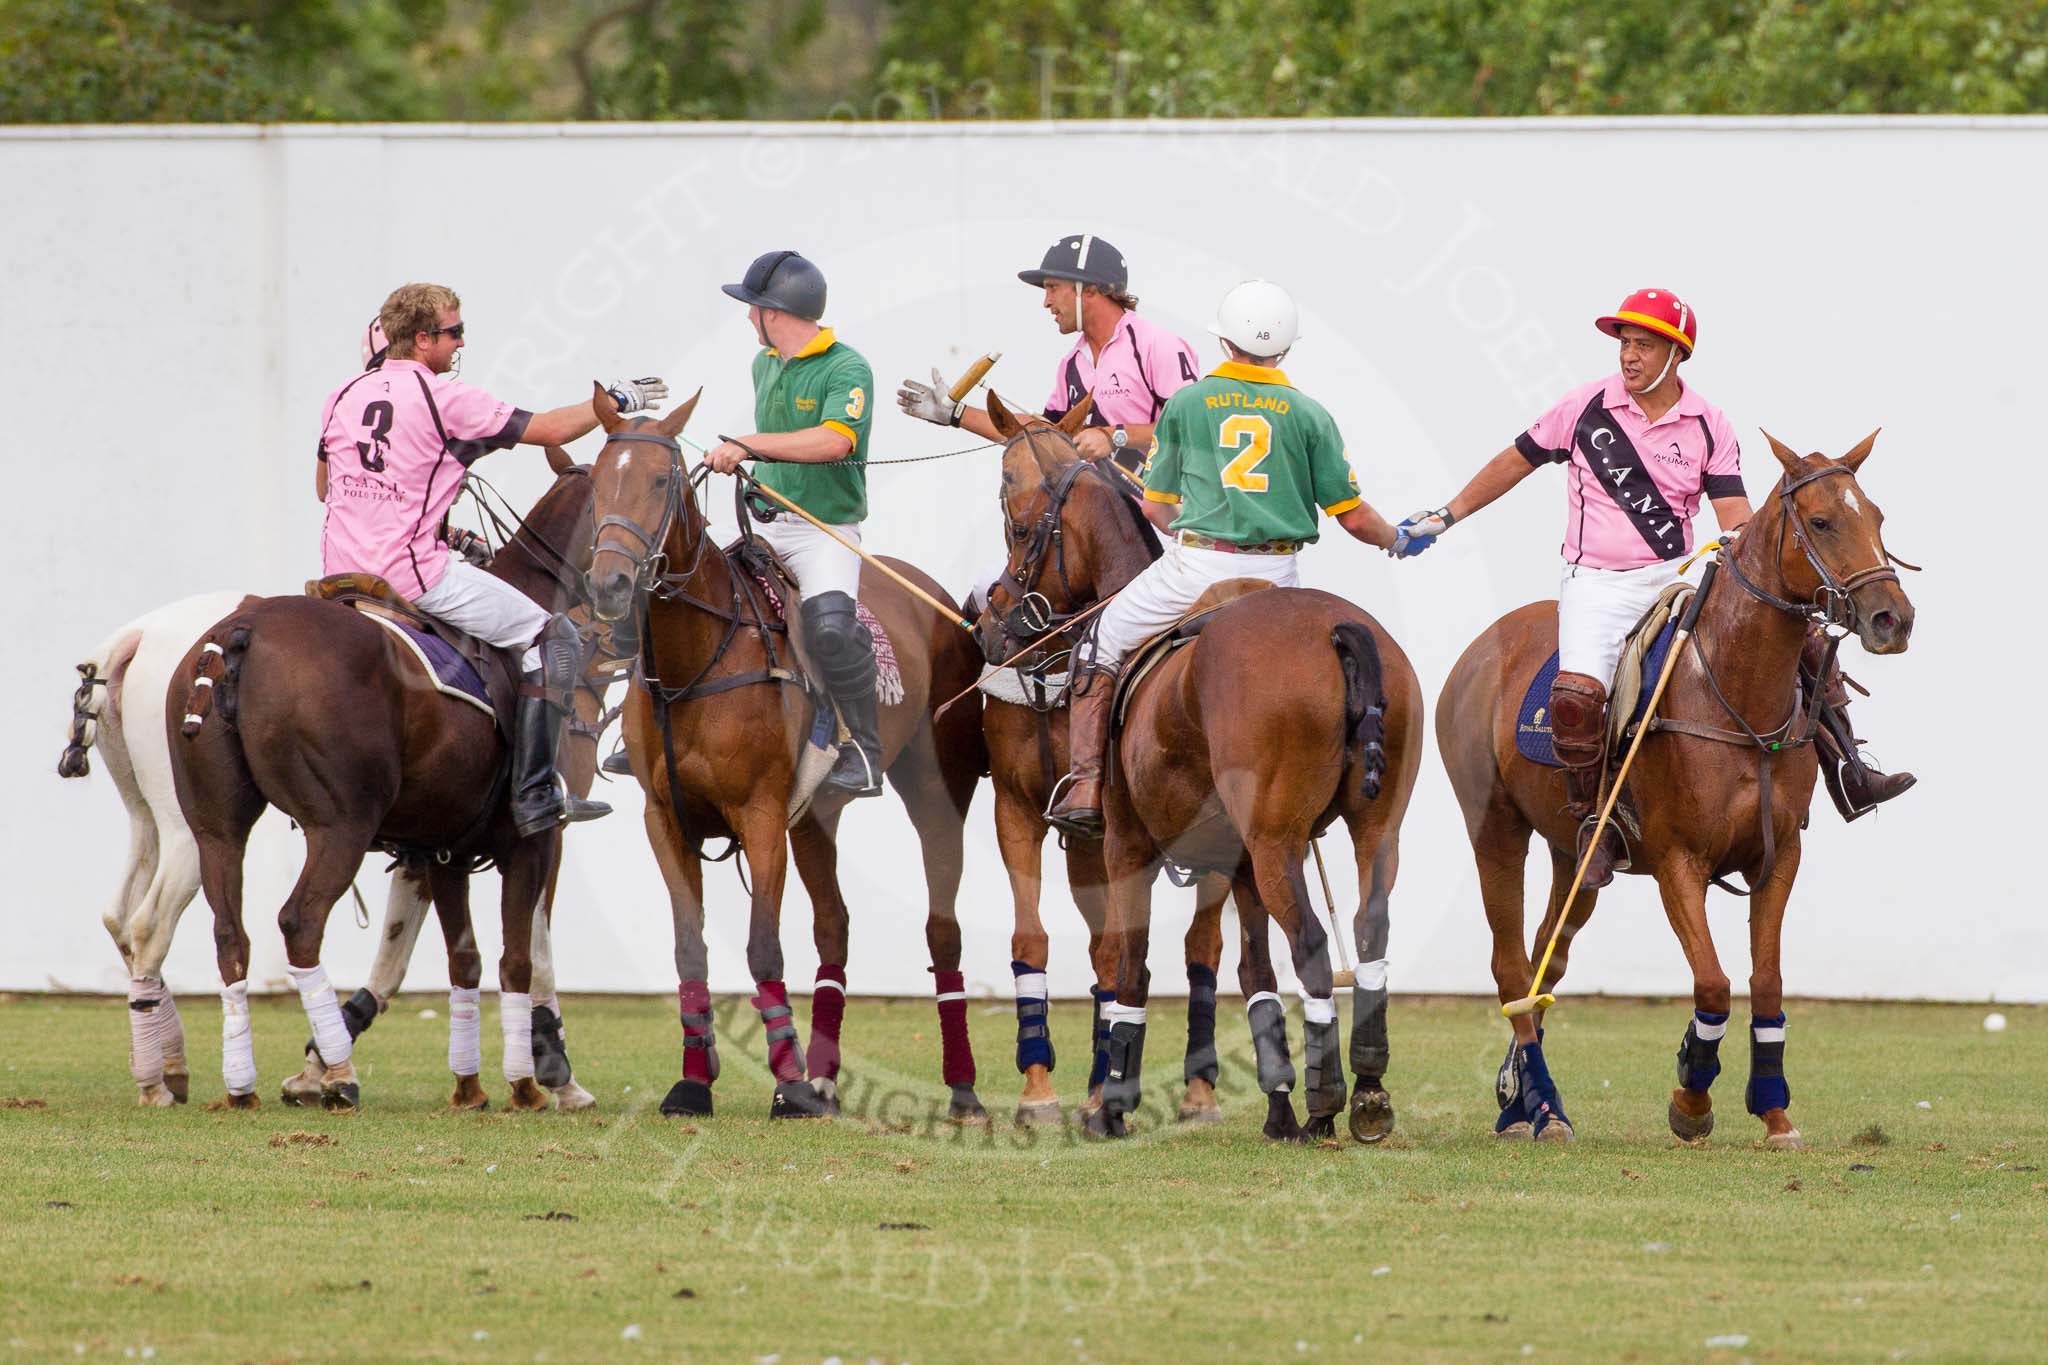 DBPC Polo in the Park 2013, Final of the Tusk Trophy (4 Goals), Rutland vs C.A.N.I..
Dallas Burston Polo Club, ,
Southam,
Warwickshire,
United Kingdom,
on 01 September 2013 at 17:10, image #645